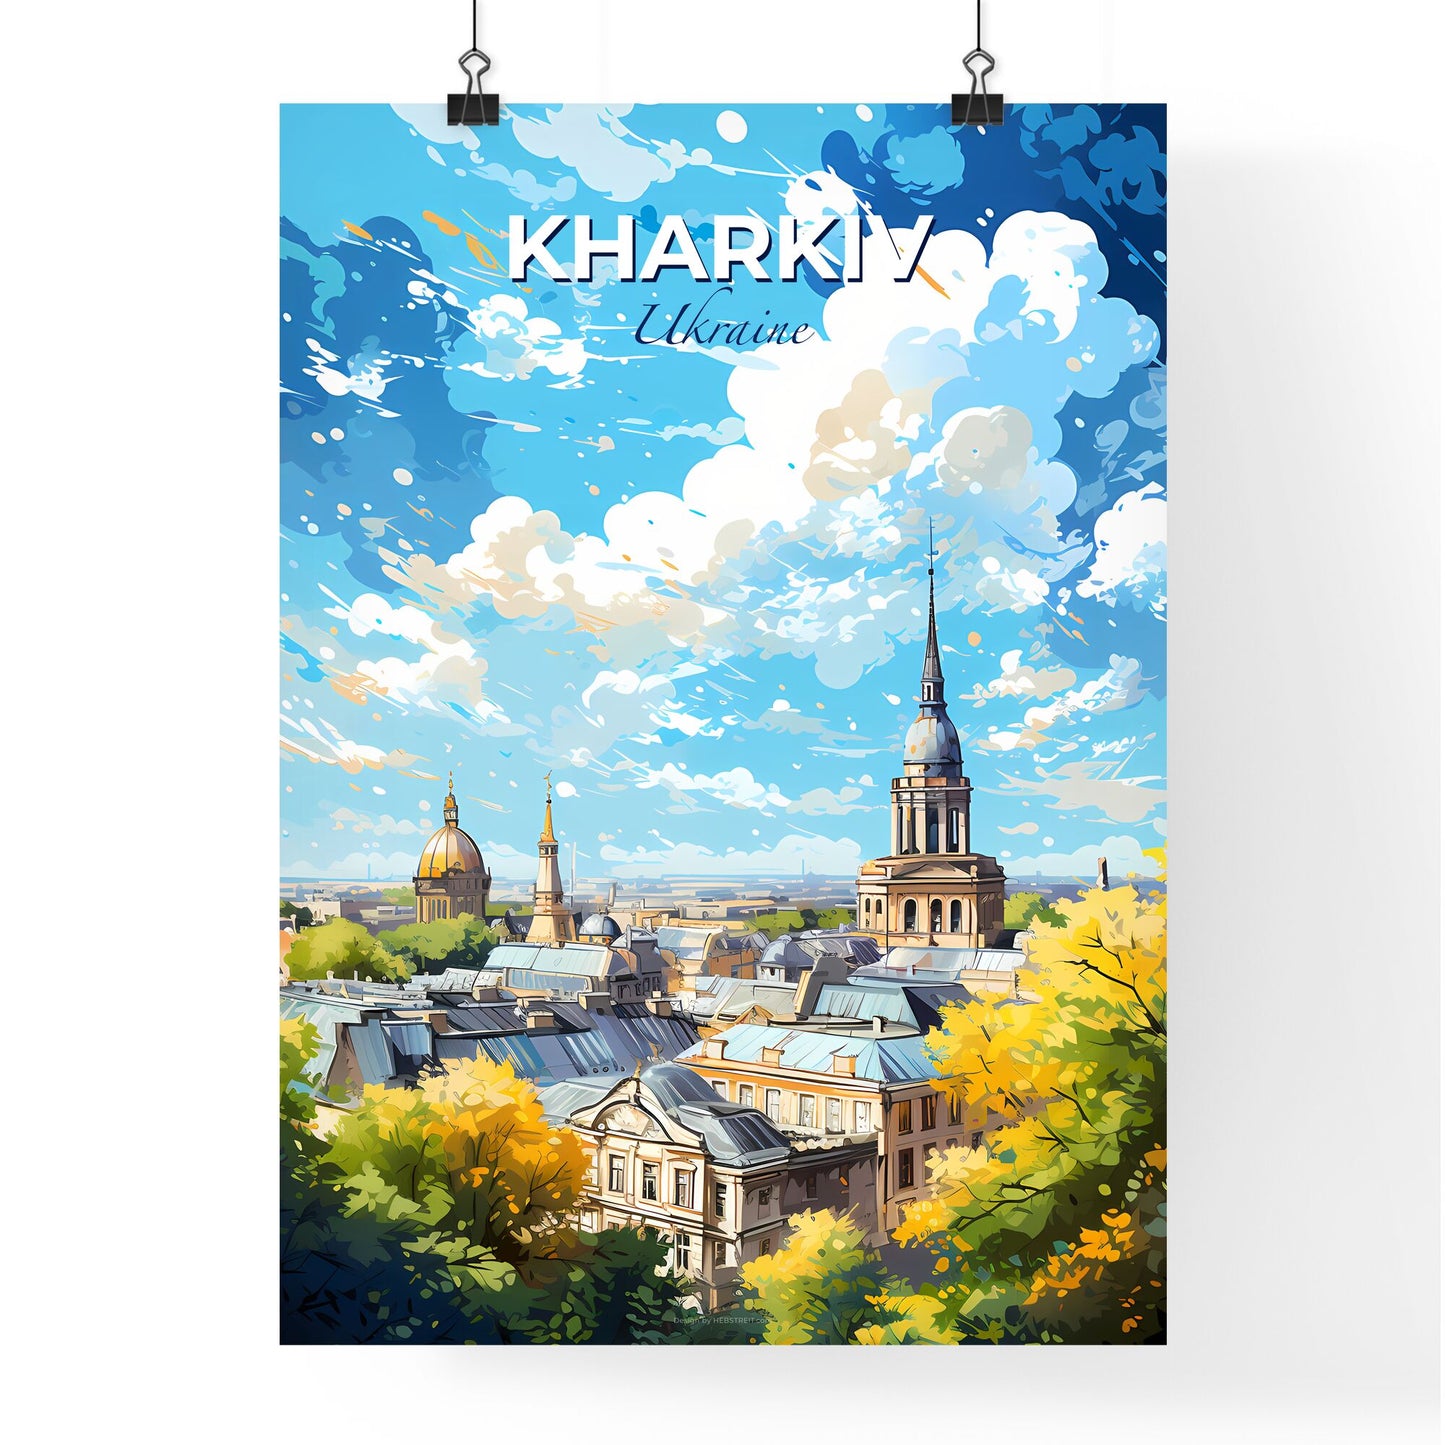 Kharkiv Ukraine Skyline - A City With A Steeple And Trees - Customizable Travel Gift Default Title